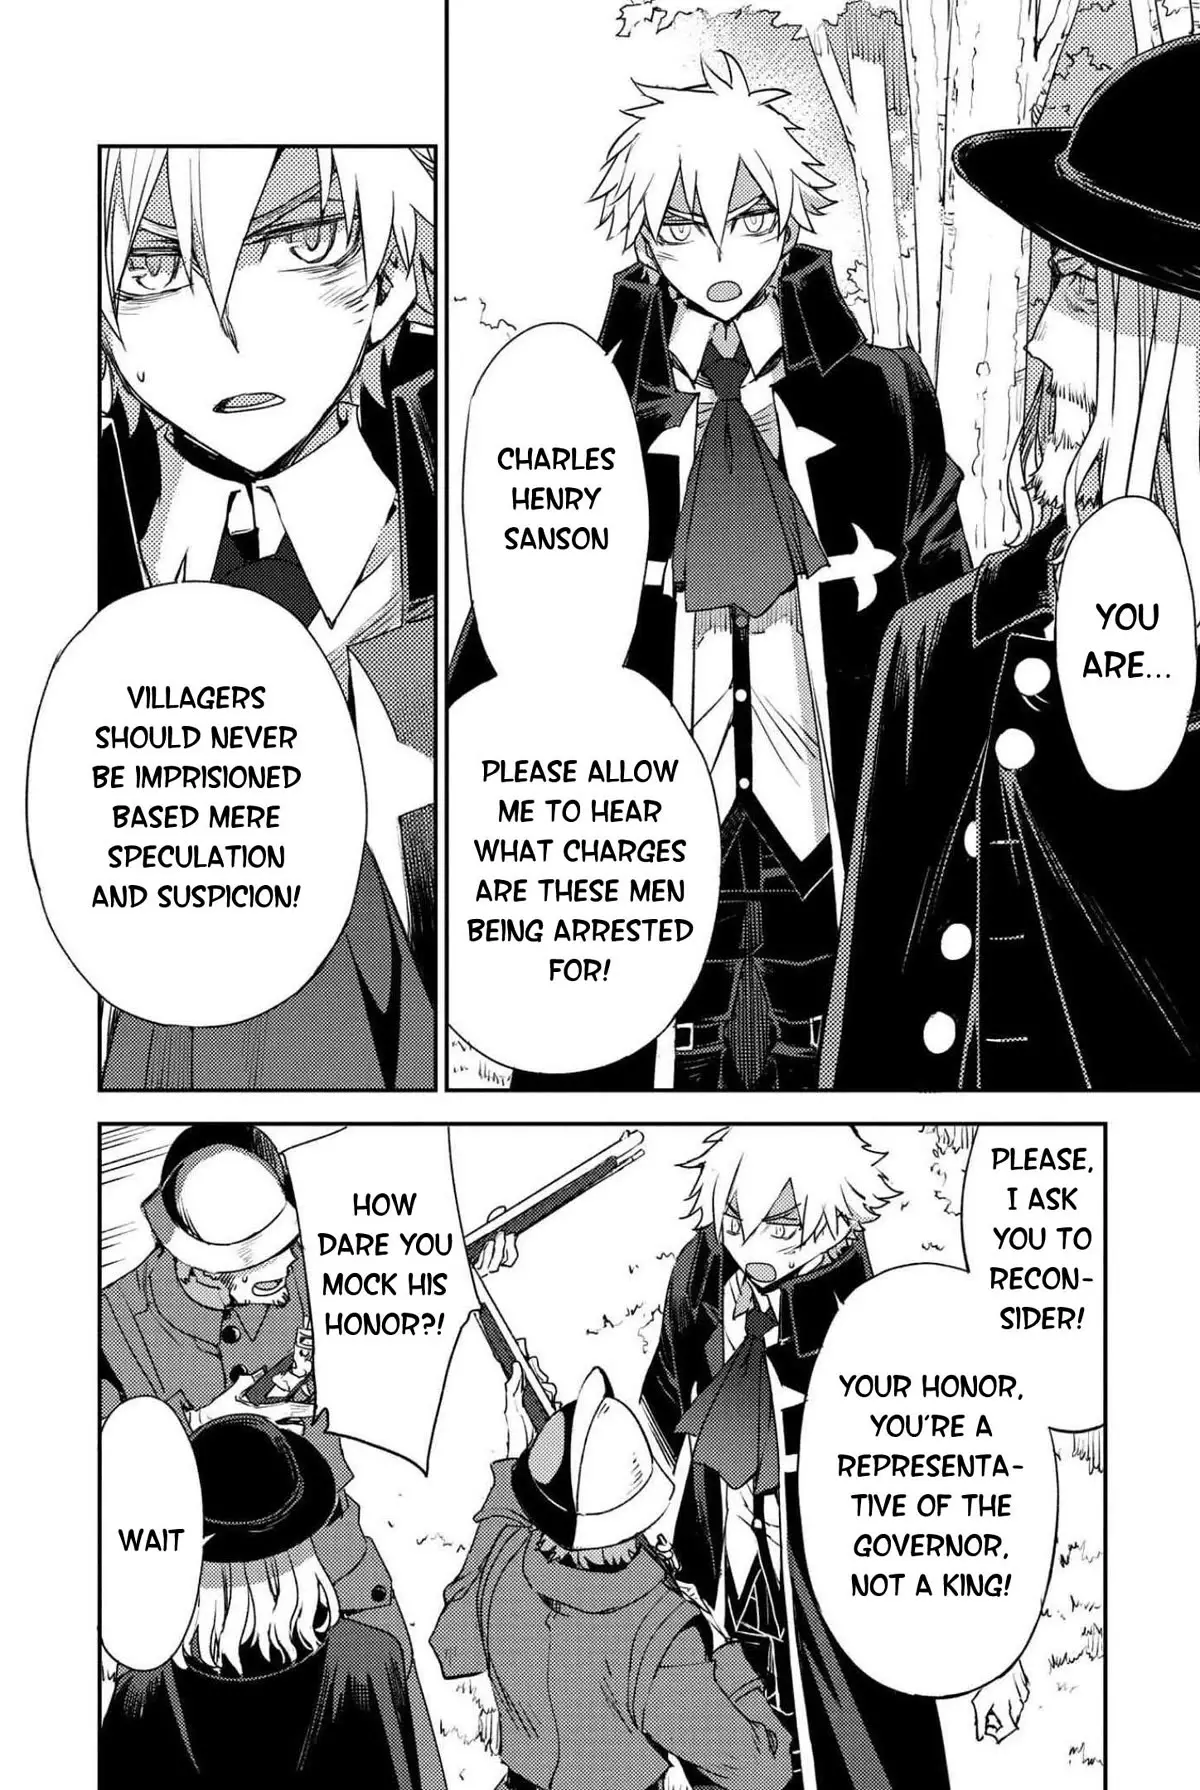 Fate/grand Order: Epic Of Remnant - Subspecies Singularity Iv: Taboo Advent Salem: Salem Of Heresy - 23 page 8-7d49079b